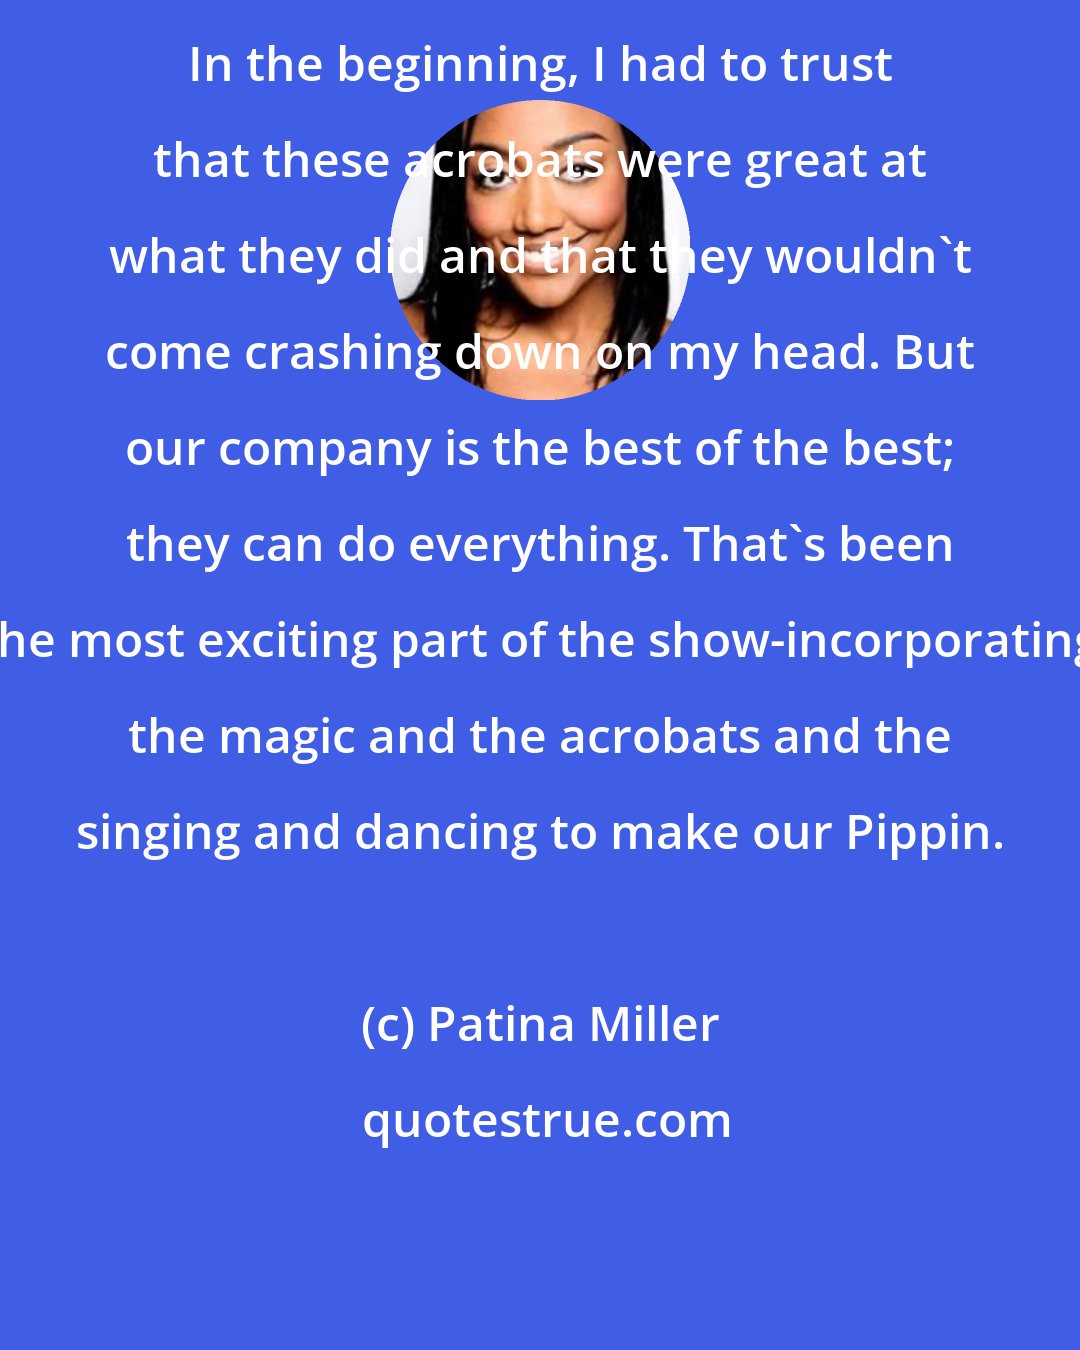 Patina Miller: In the beginning, I had to trust that these acrobats were great at what they did and that they wouldn't come crashing down on my head. But our company is the best of the best; they can do everything. That's been the most exciting part of the show-incorporating the magic and the acrobats and the singing and dancing to make our Pippin.